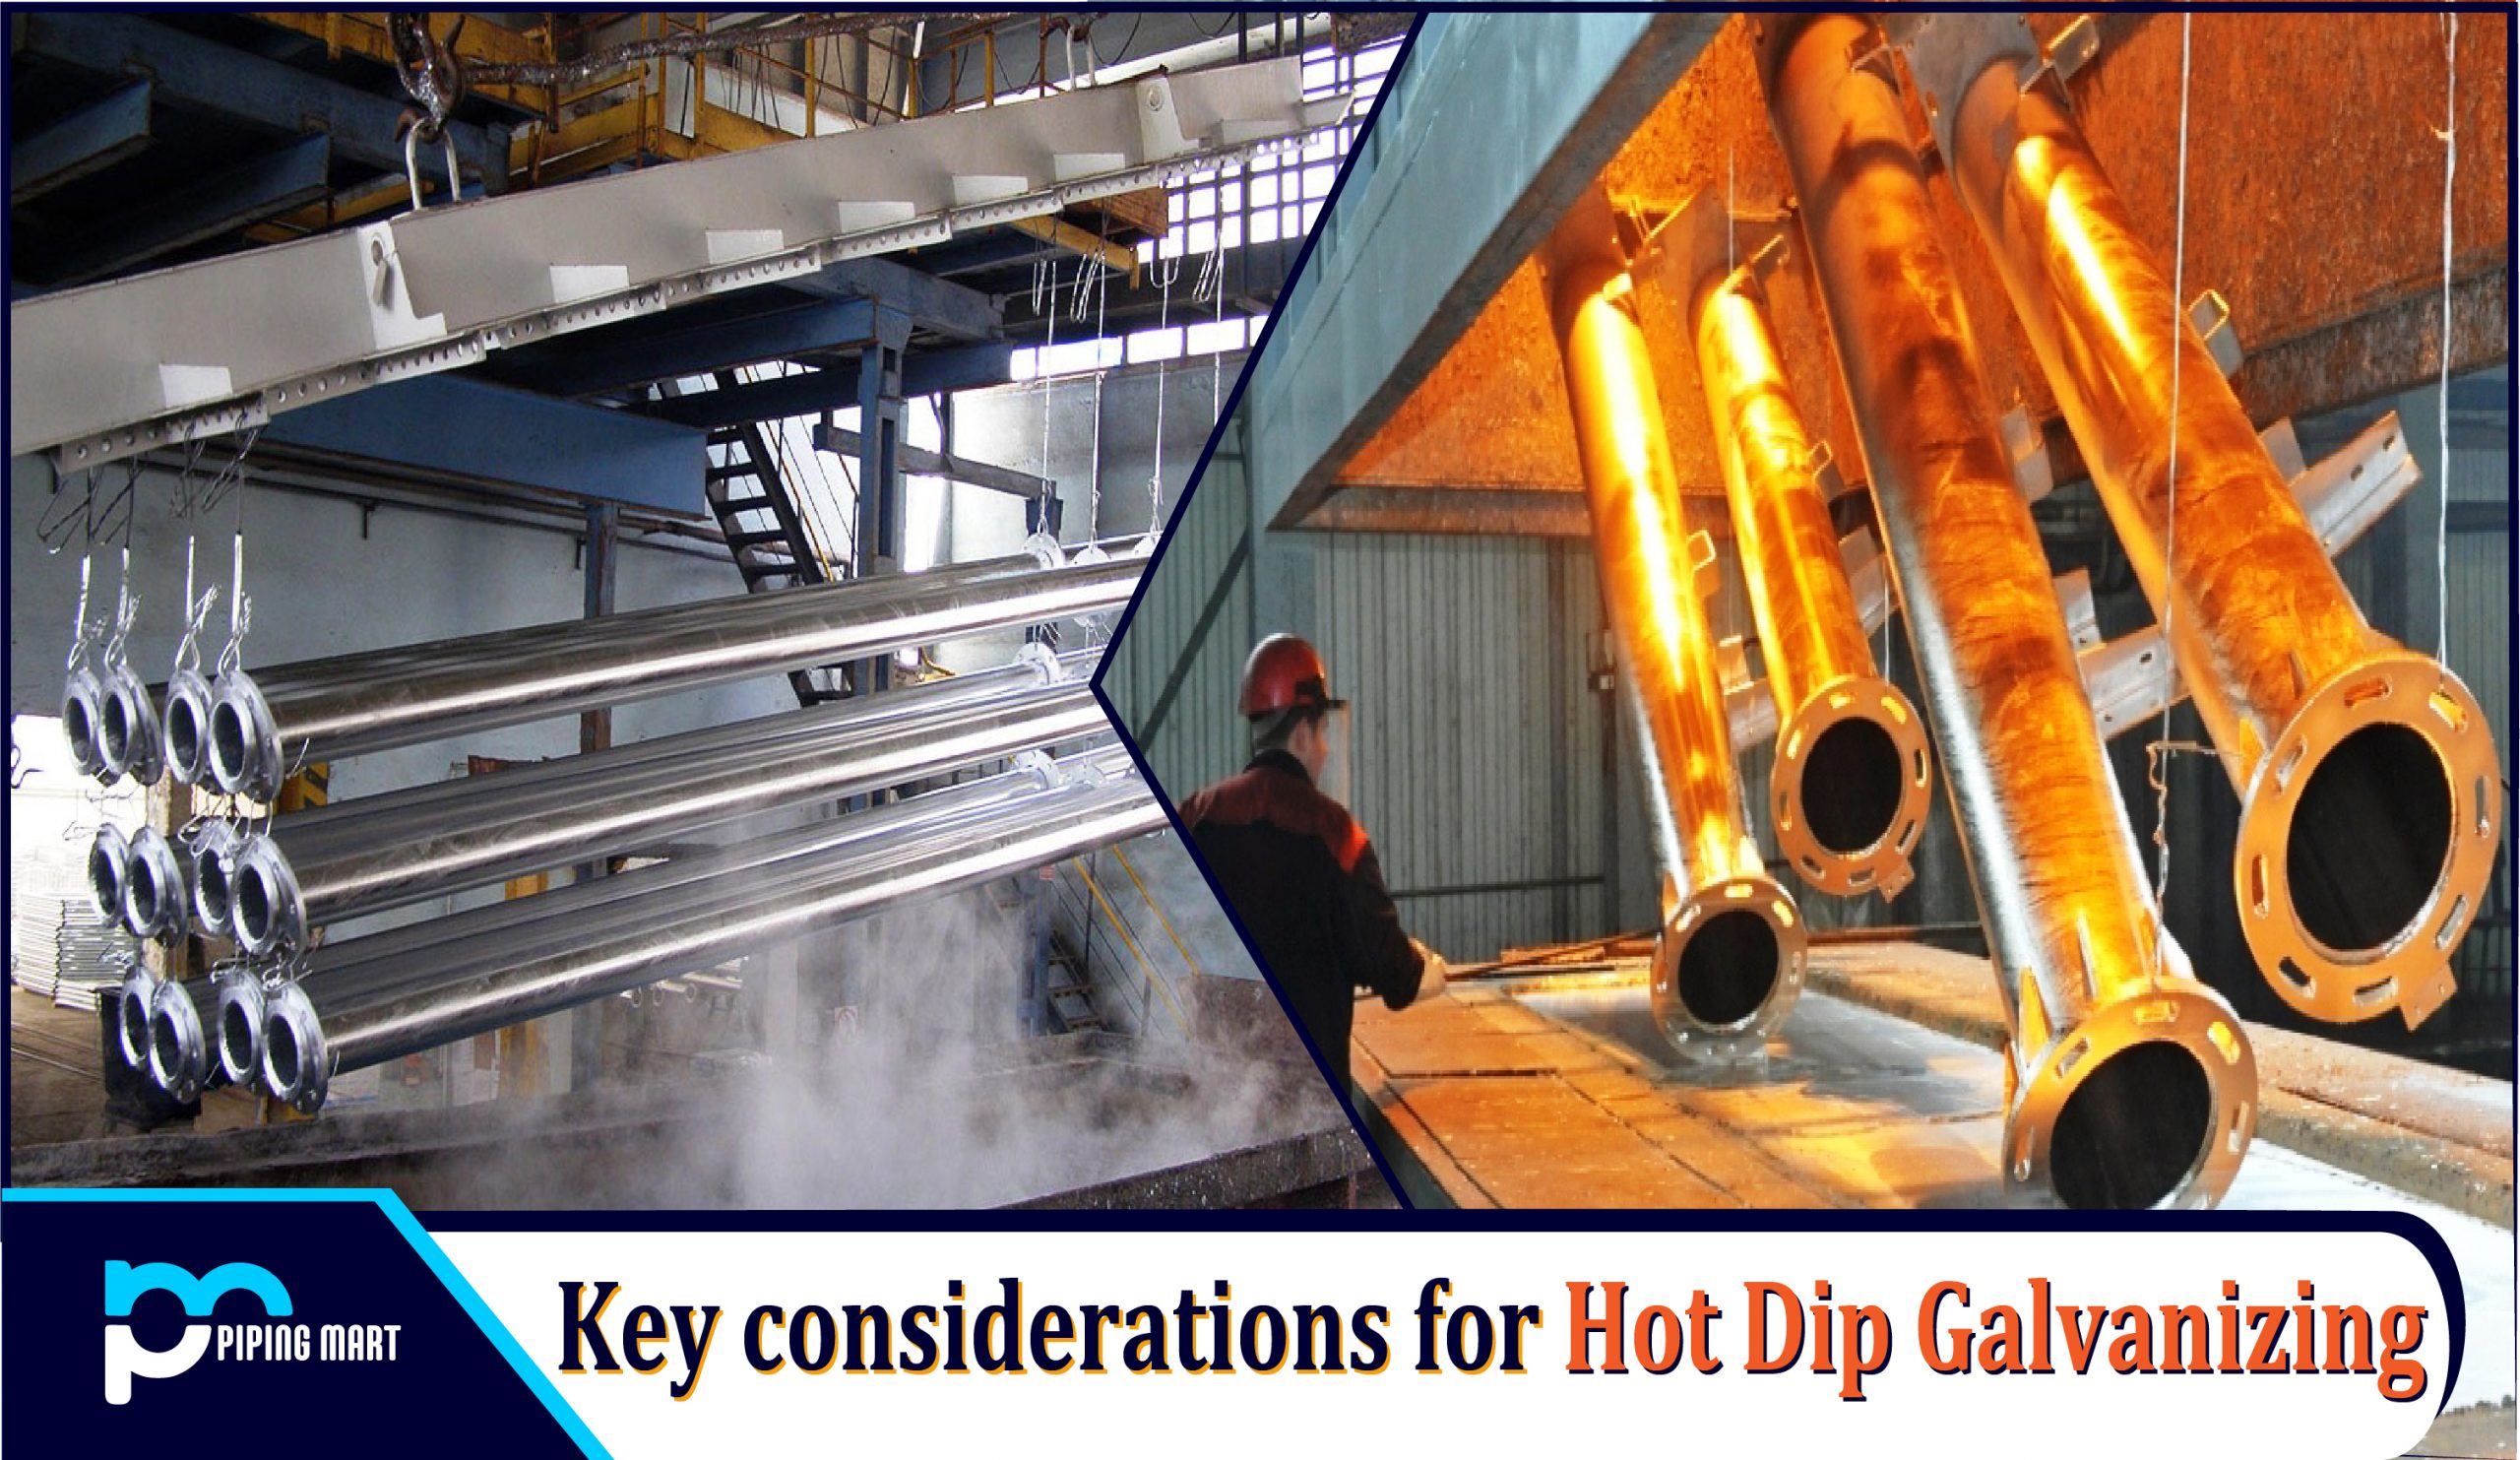 Key Considerations for Hot Dip Galvanizing